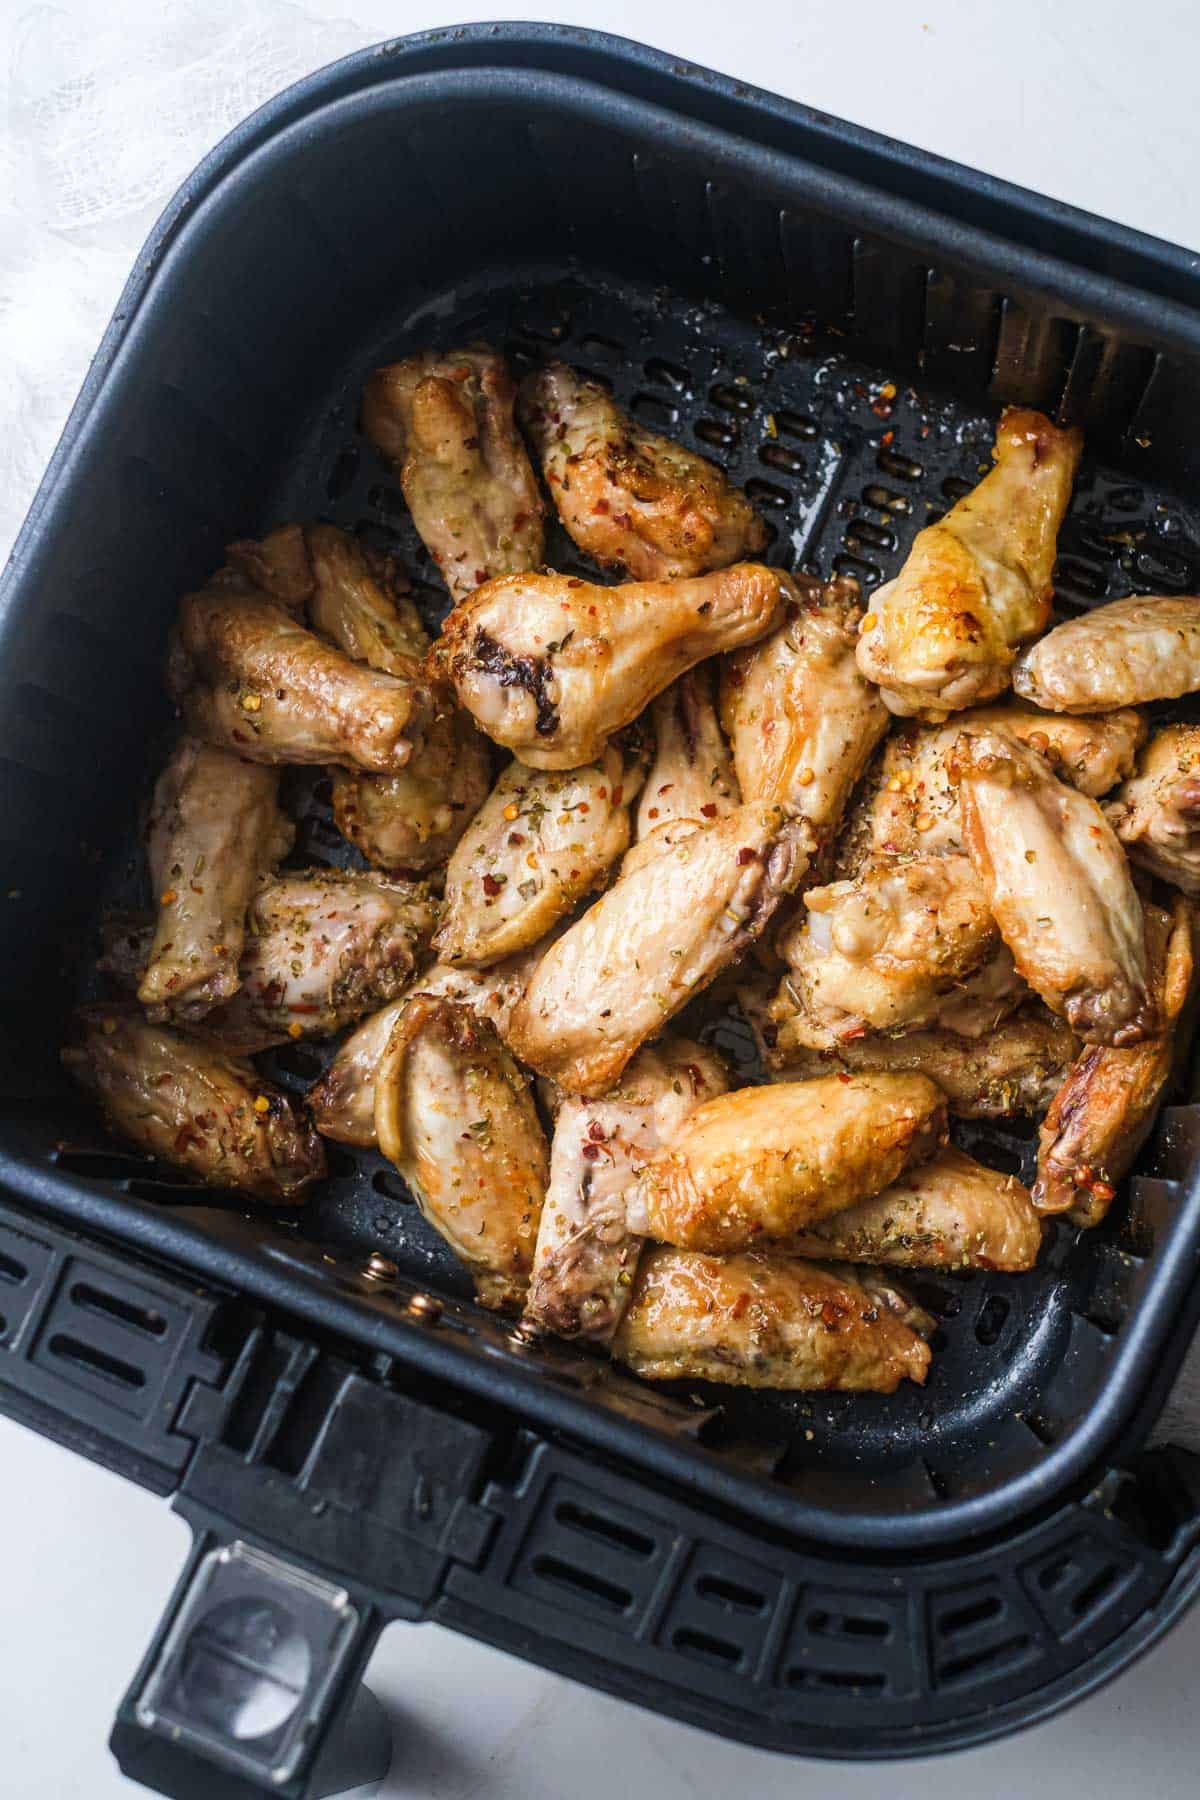 top down view of the cooked cajun wings inside the air fryer basket